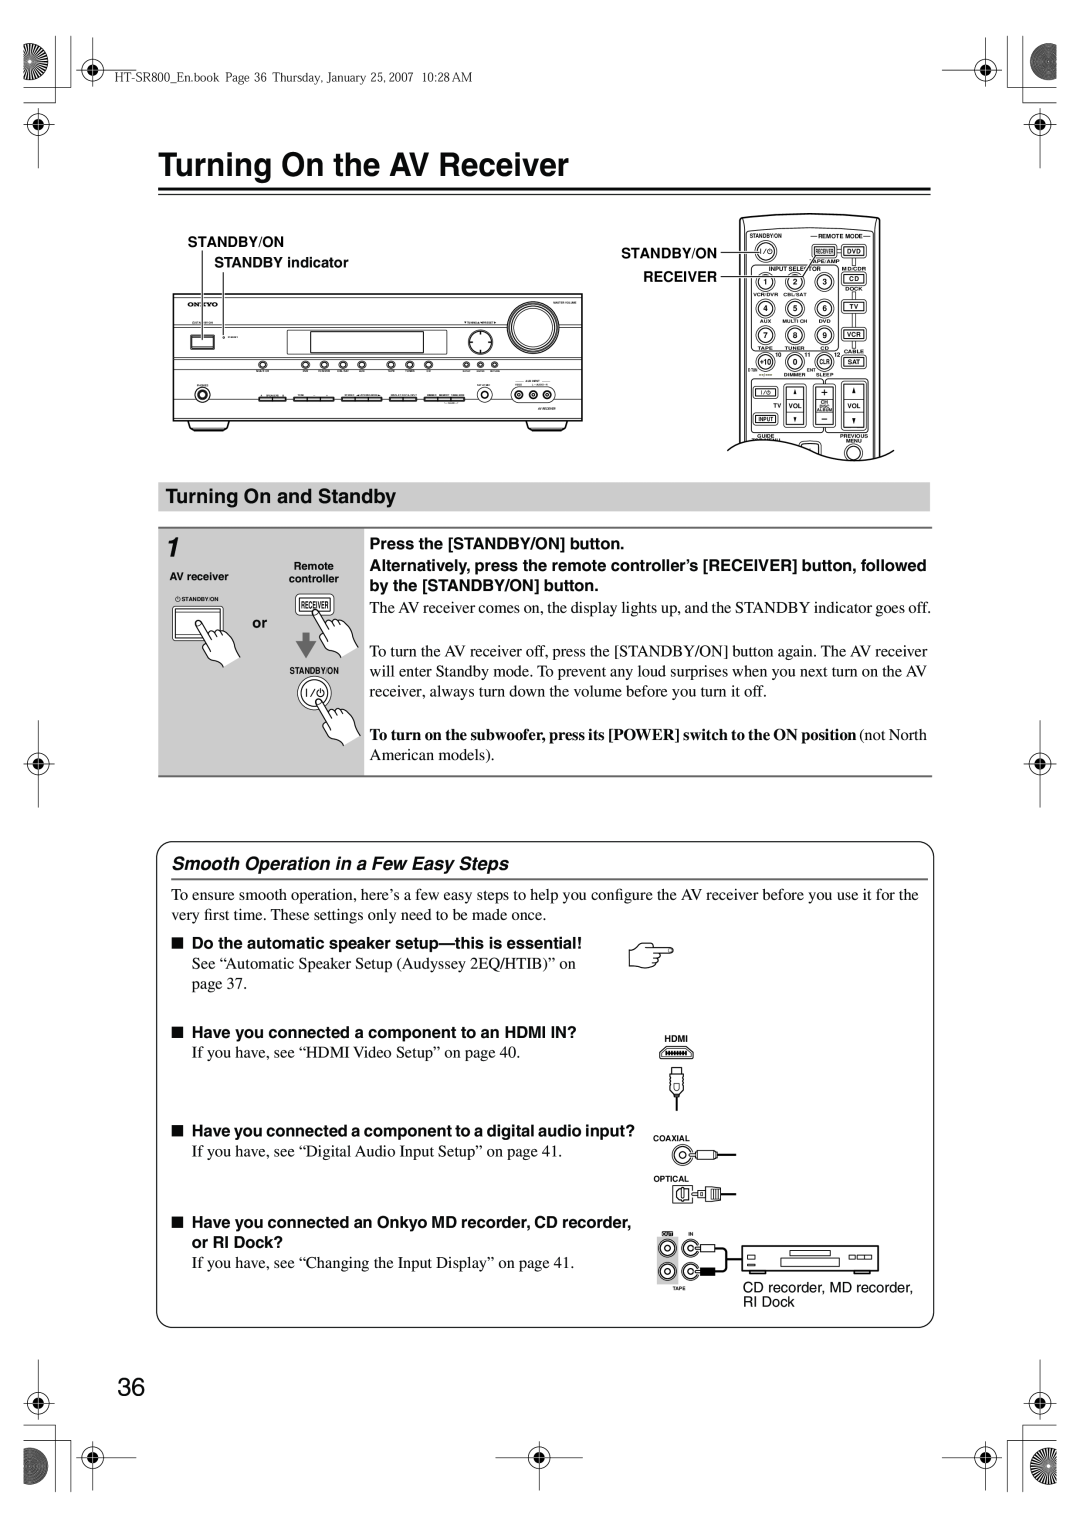 Onkyo HT-SR800 instruction manual Turning On the AV Receiver, Turning On and Standby, Smooth Operation in a Few Easy Steps 